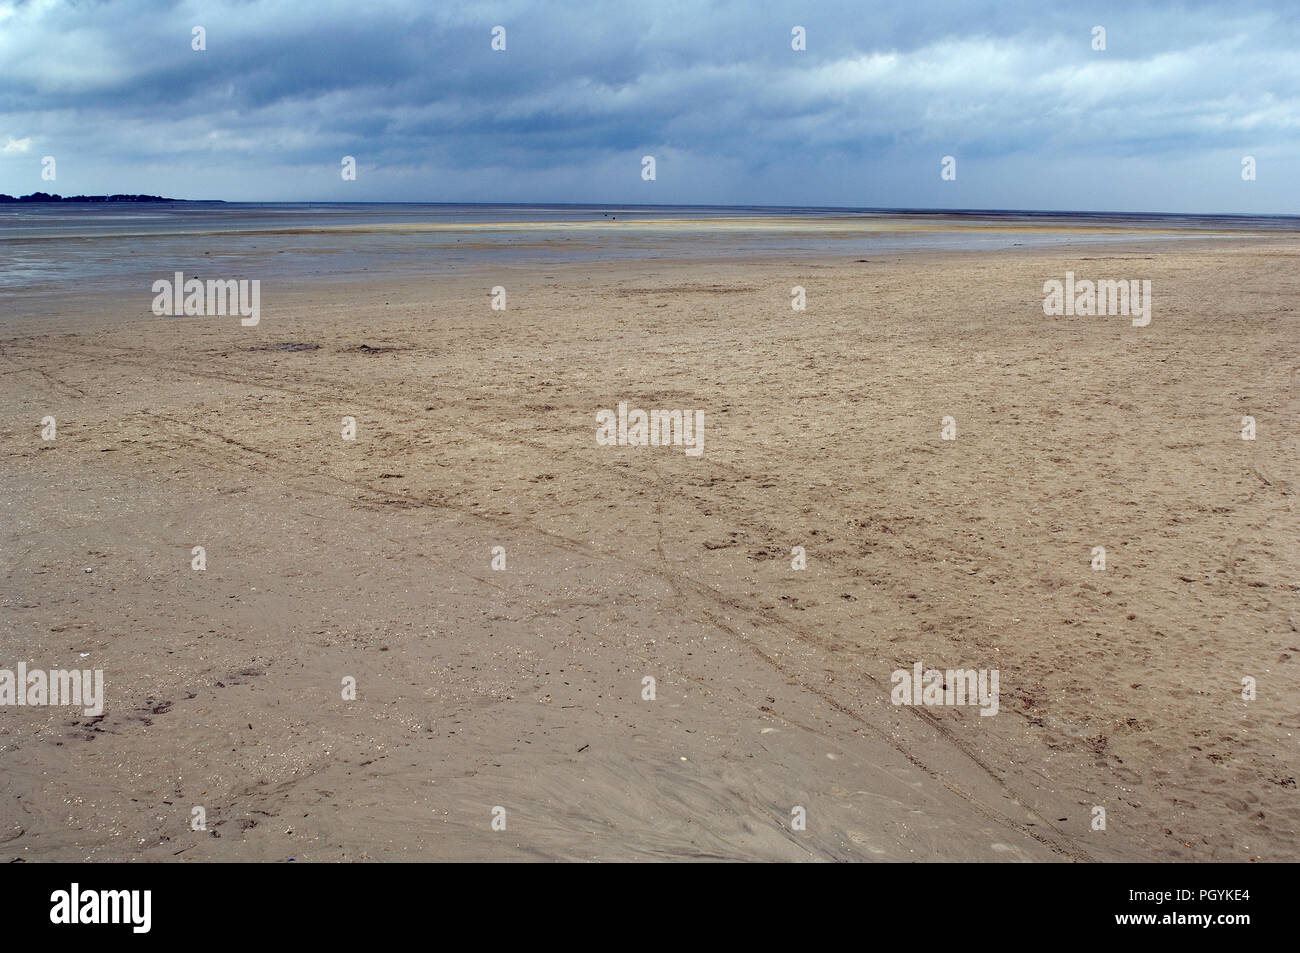 France - Bay of Somme - France - low tide Stock Photo